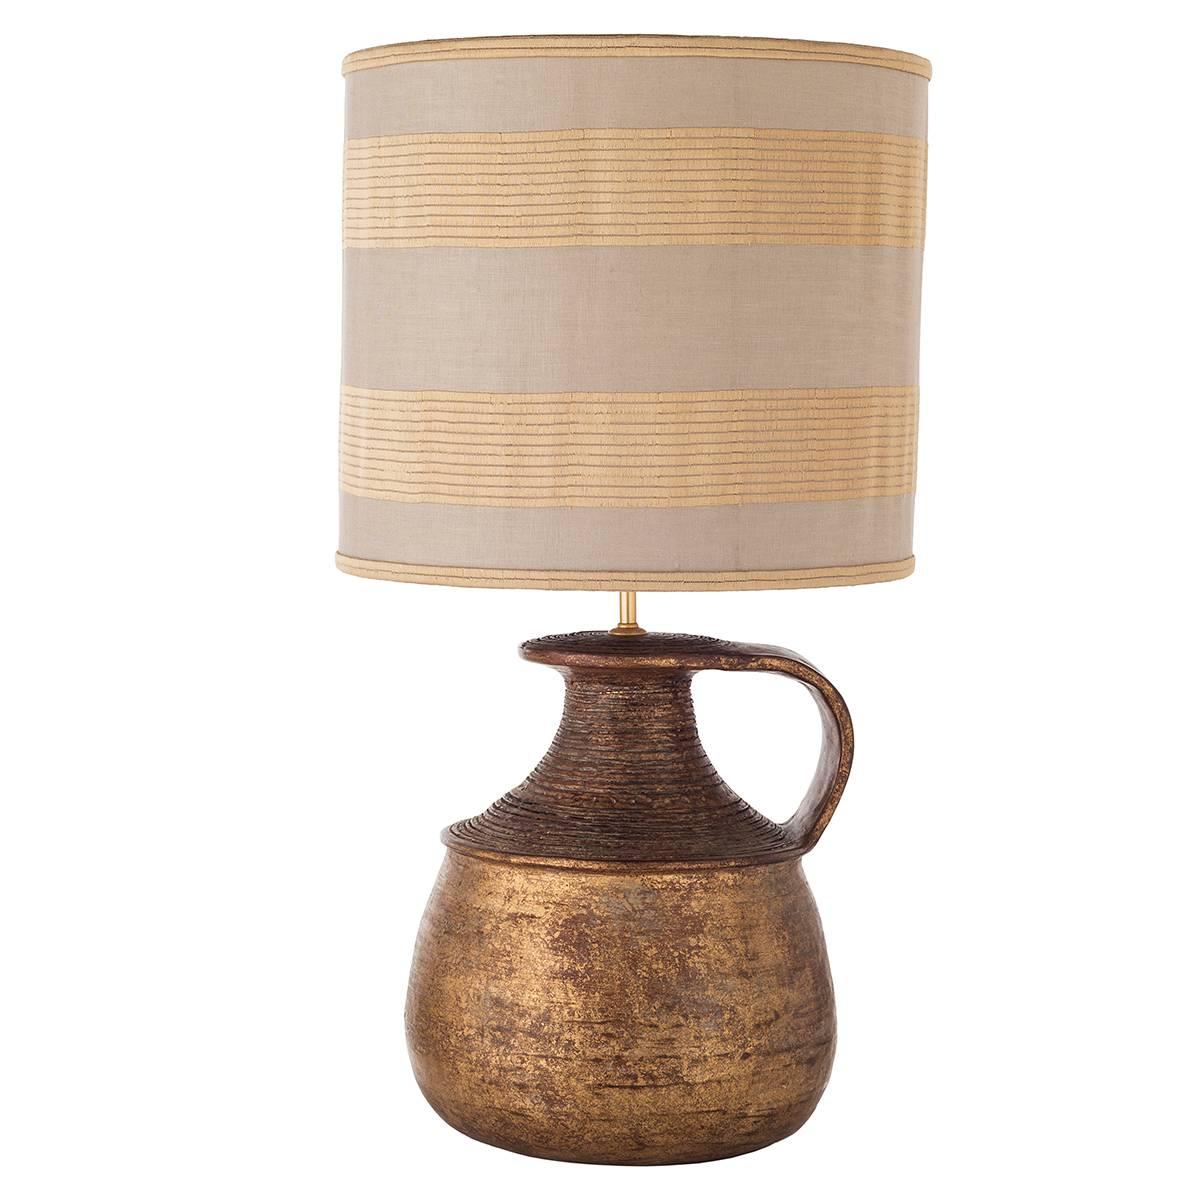 Pair of rustic terracotta table lamps featured by a handle vase-shaped body. Ceramic is skillfully gold and rusty-brown decorated, wonderfully matched with a cylindrical rich shade, striped in gathered gold and off-white fabric. Wired to your